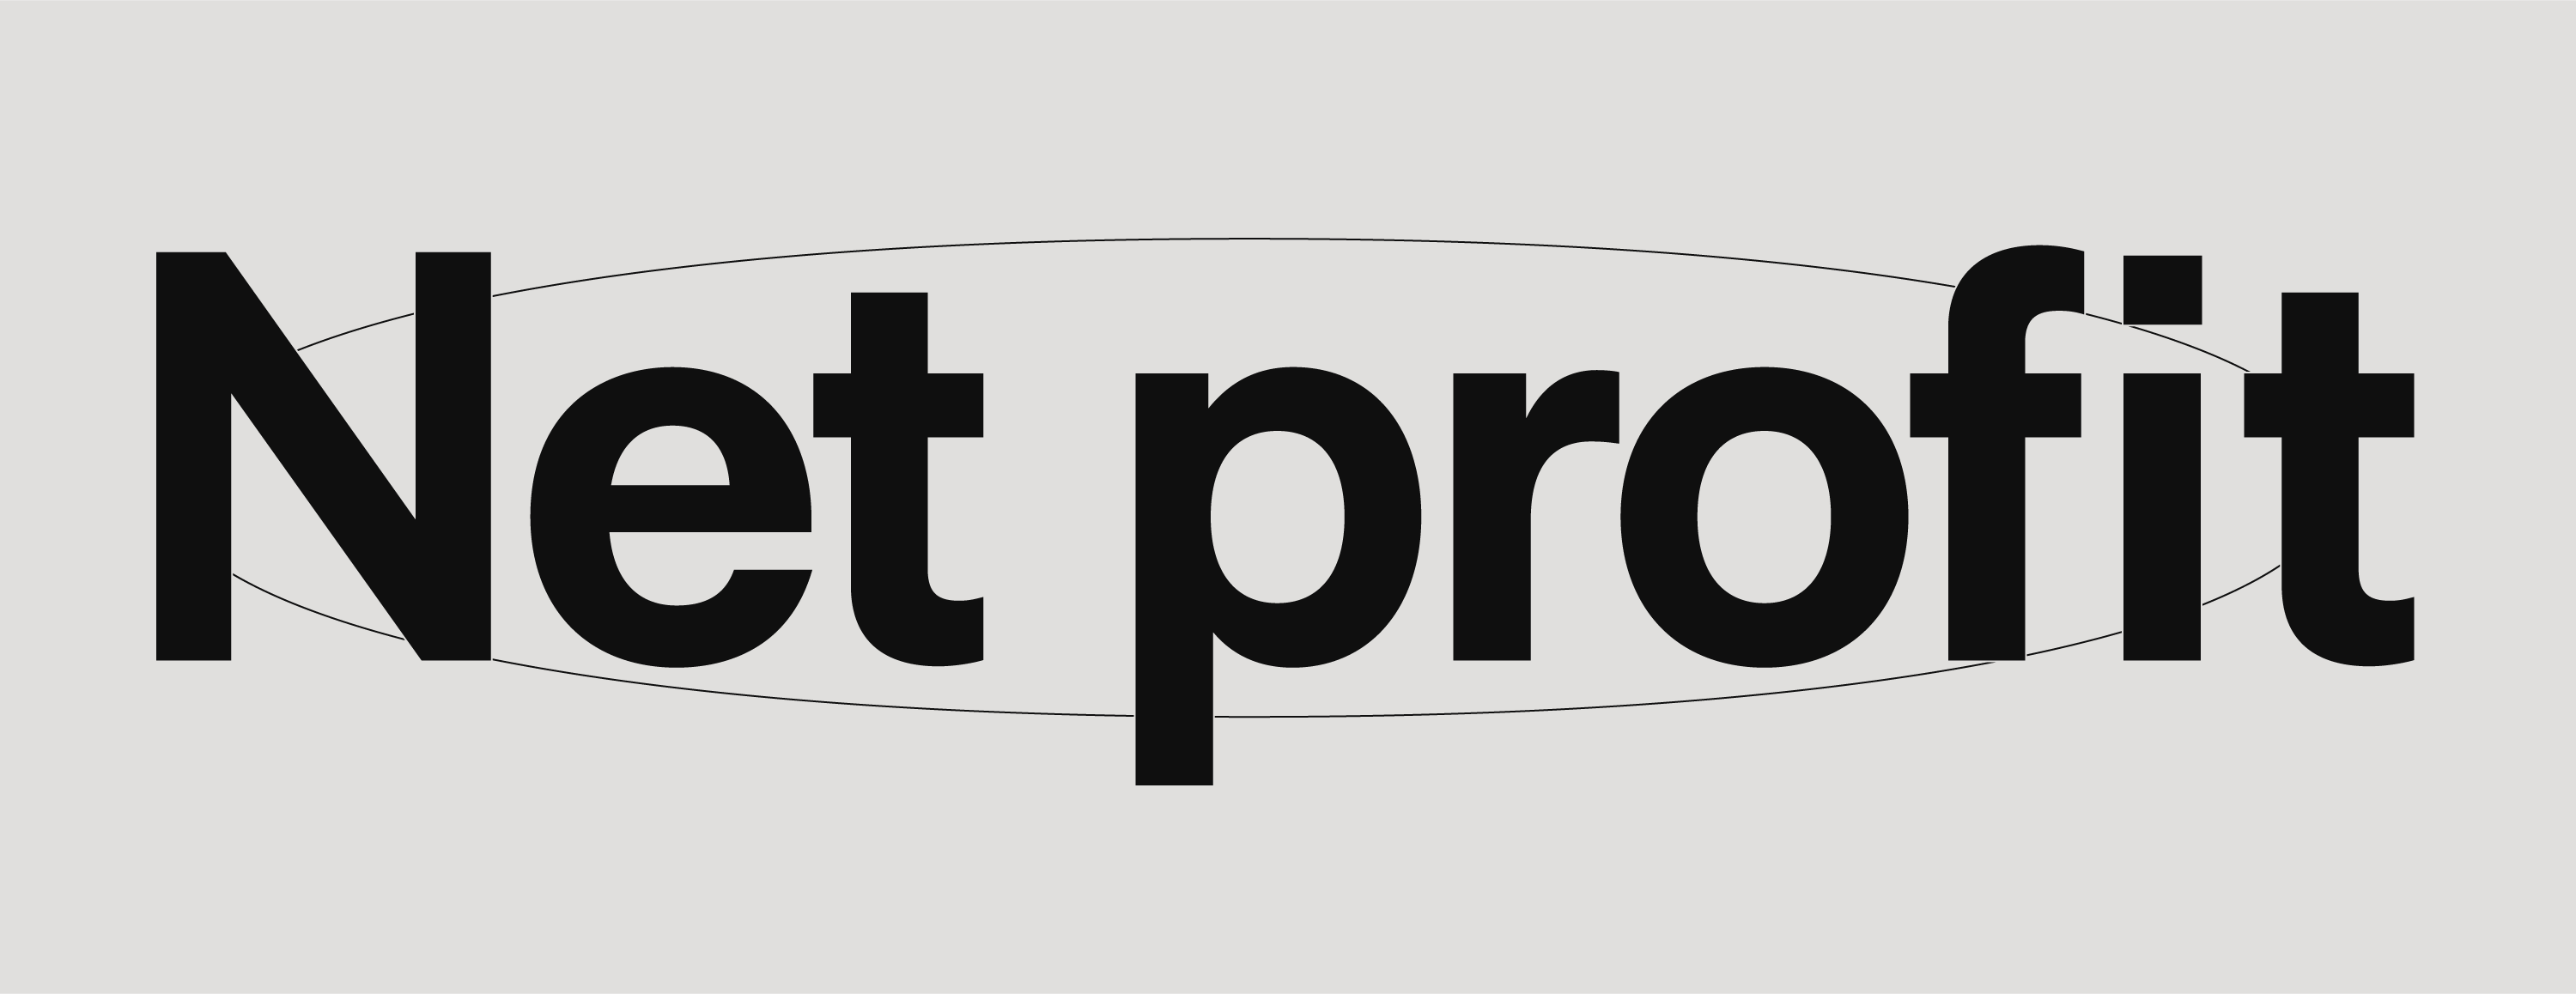 Net profit in black letters on a white background